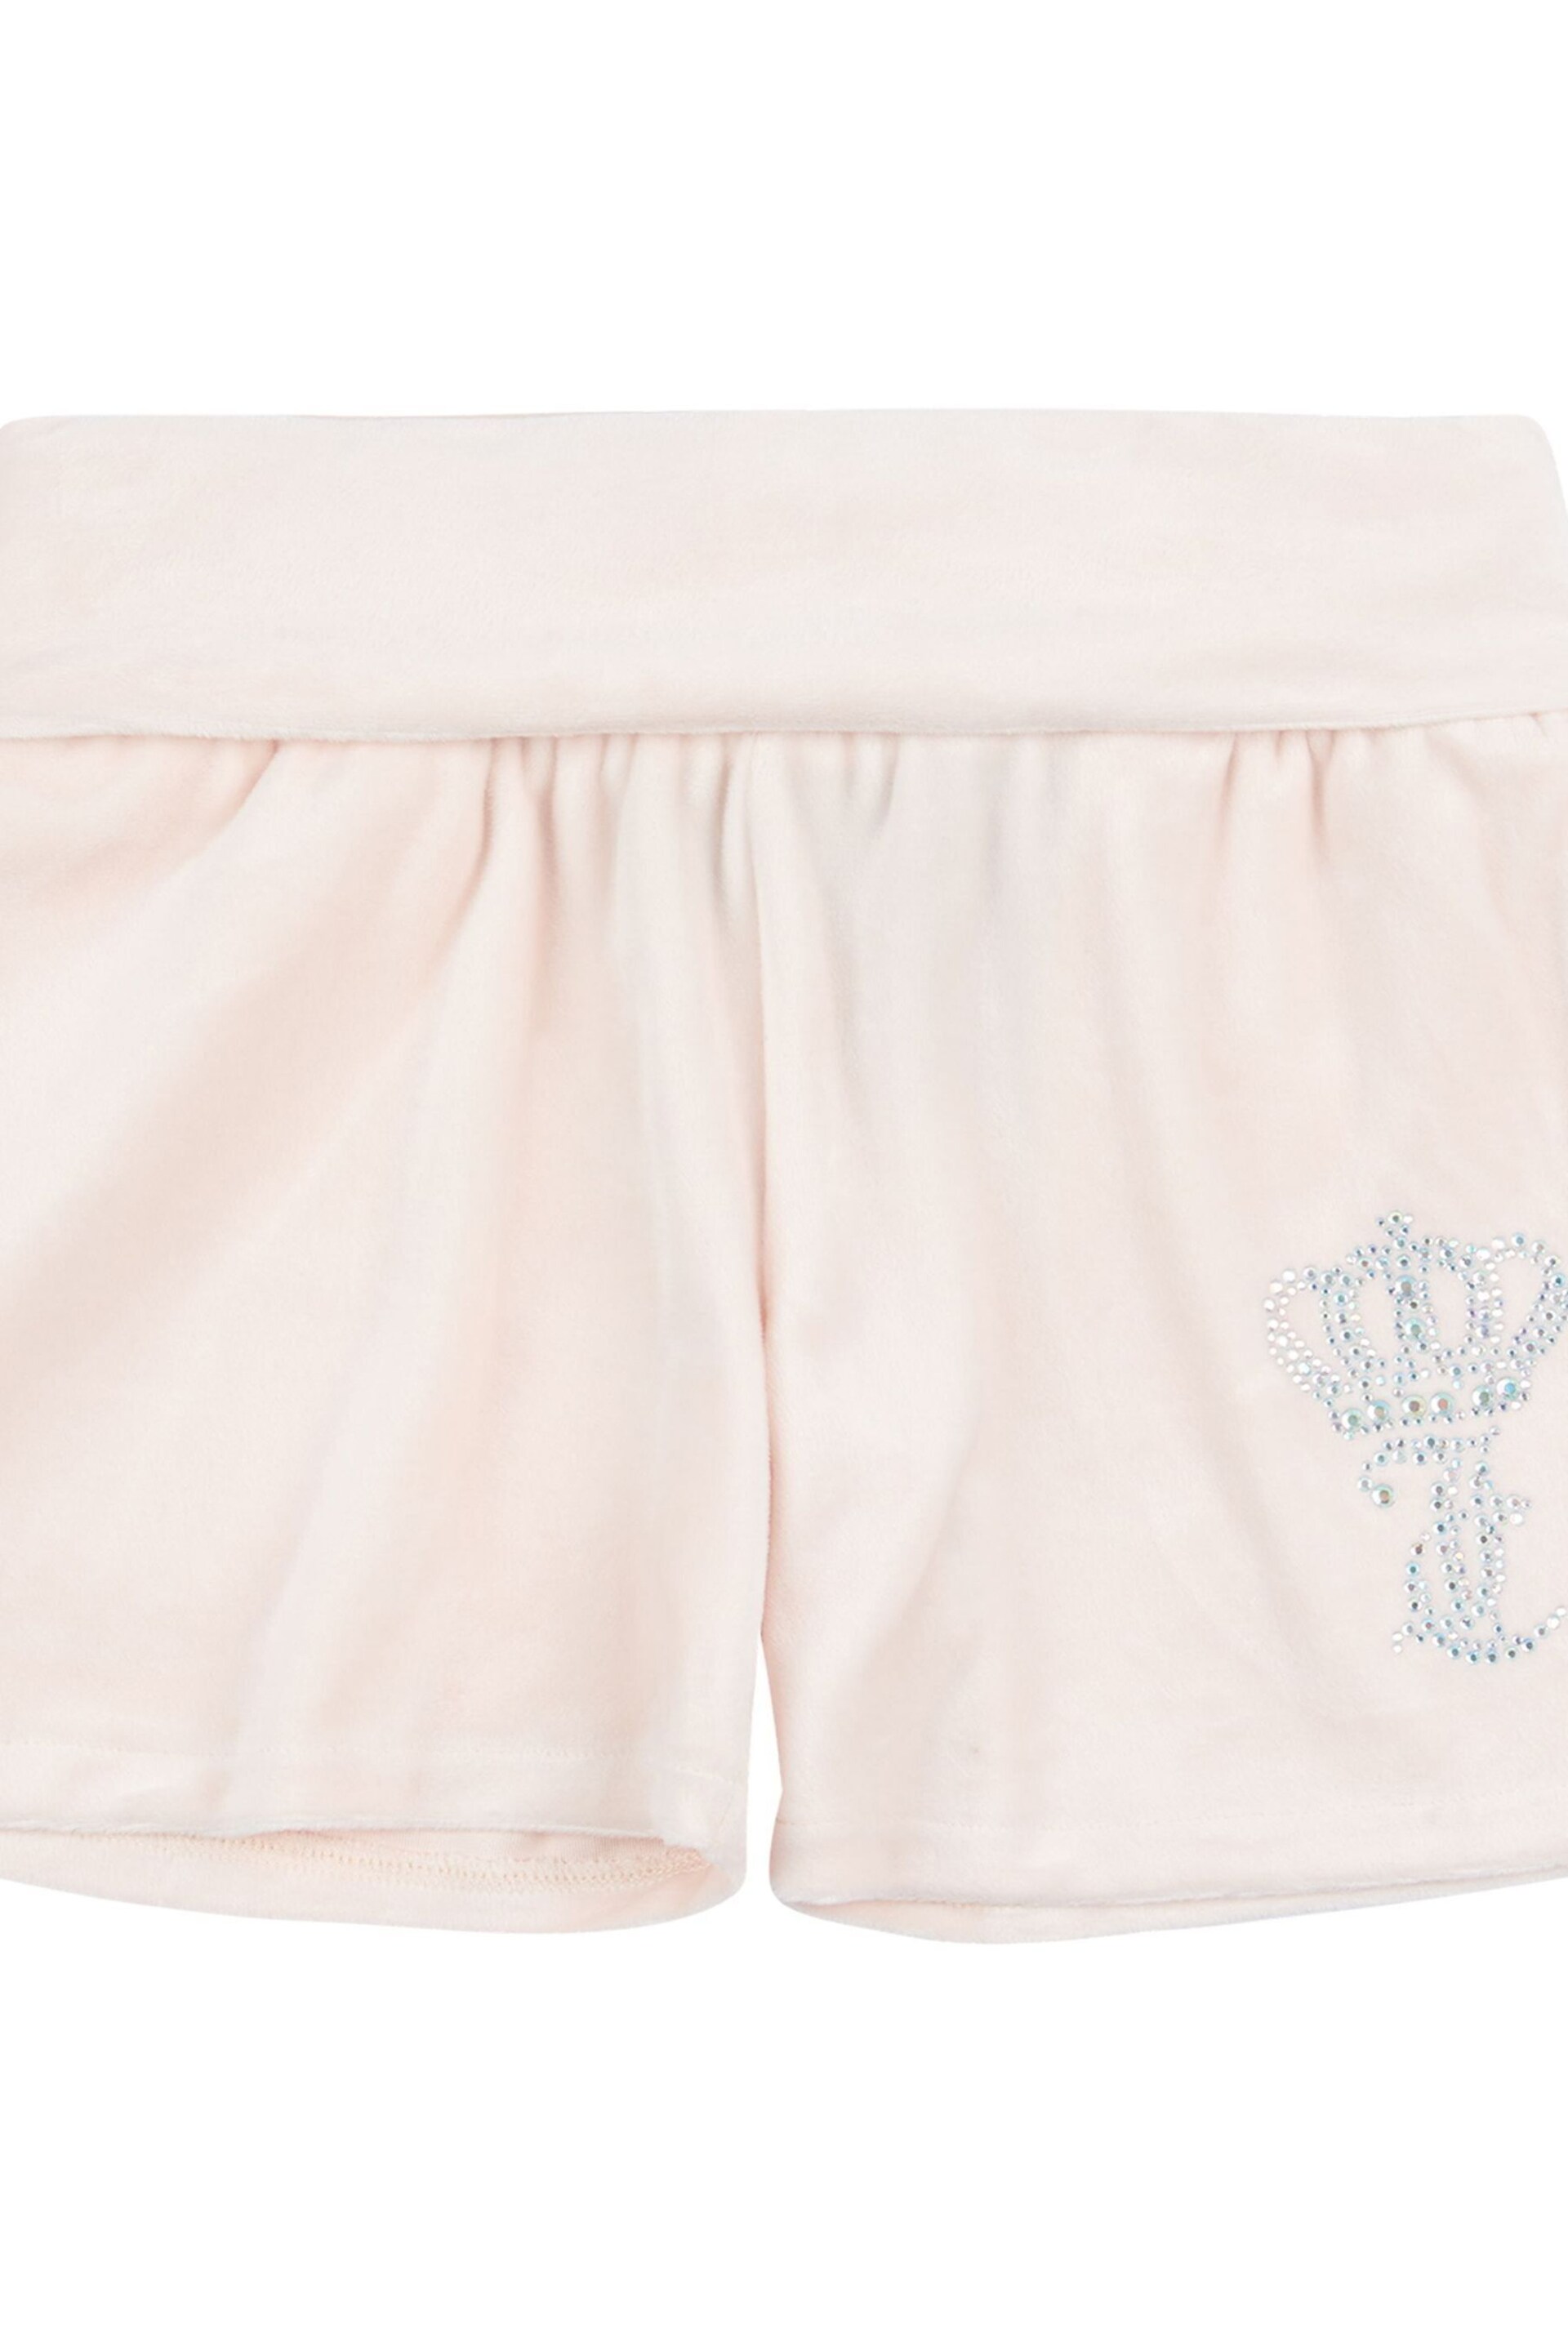 Juicy Couture Girls Deep Waistband Low Rise Pink Shorts - Image 7 of 10